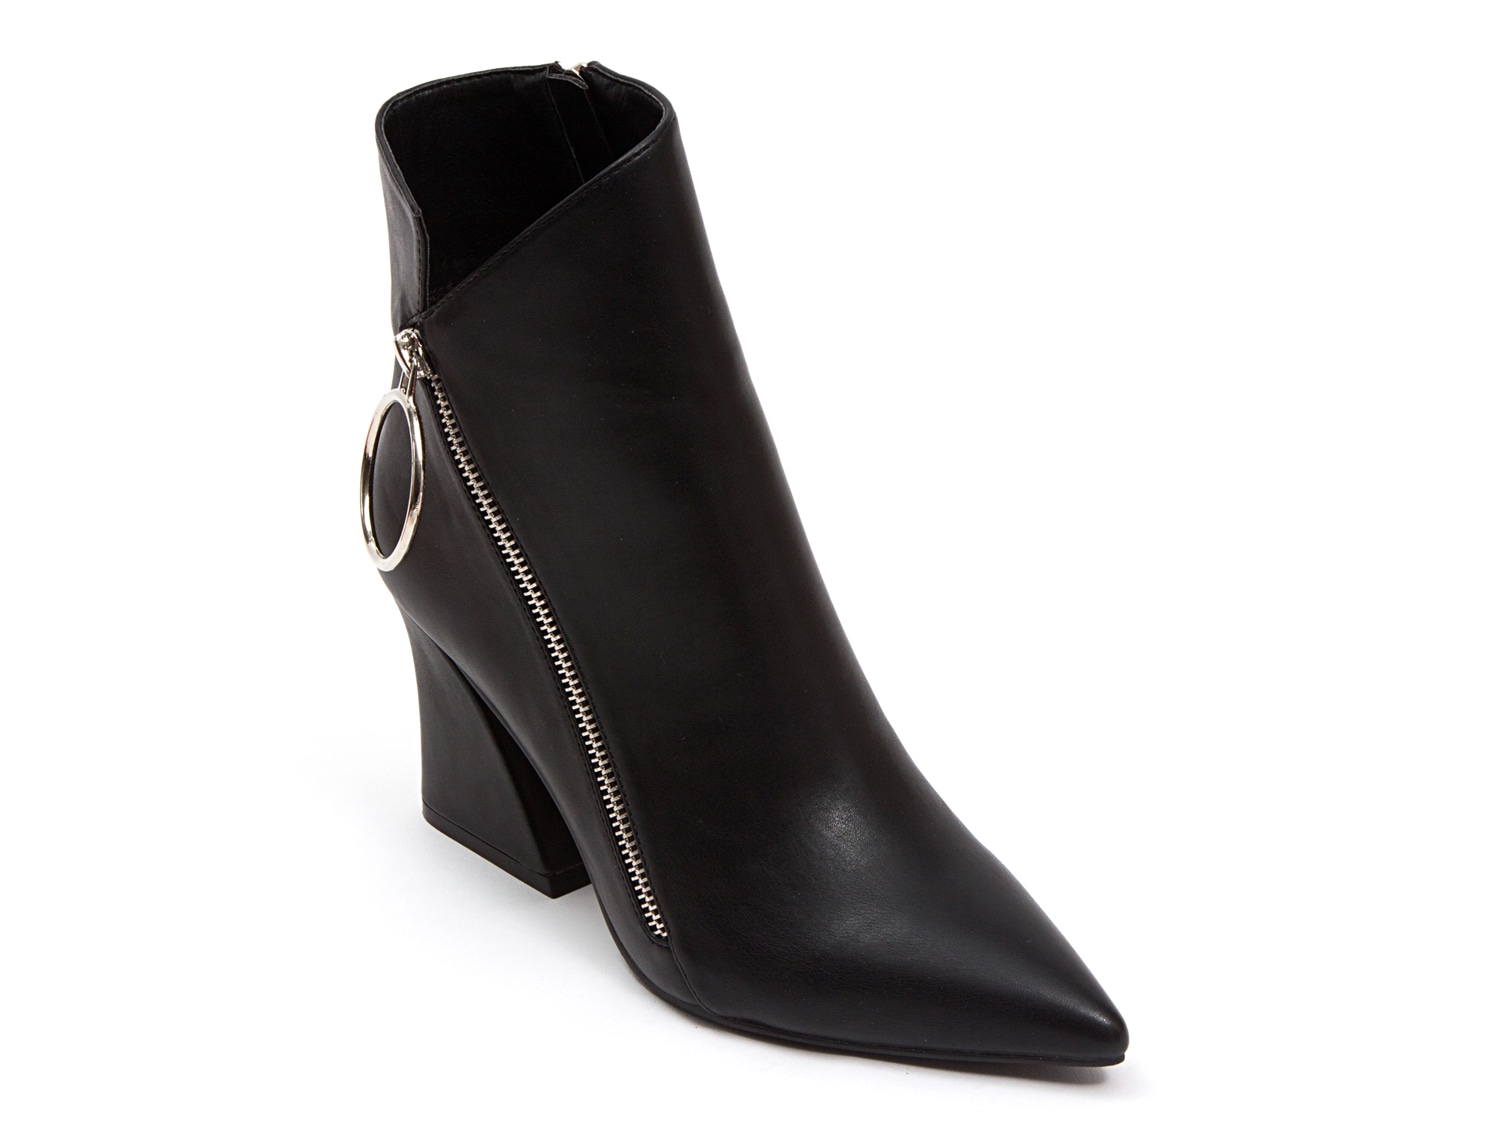 Ninety Union Classic Bootie - Free Shipping | DSW